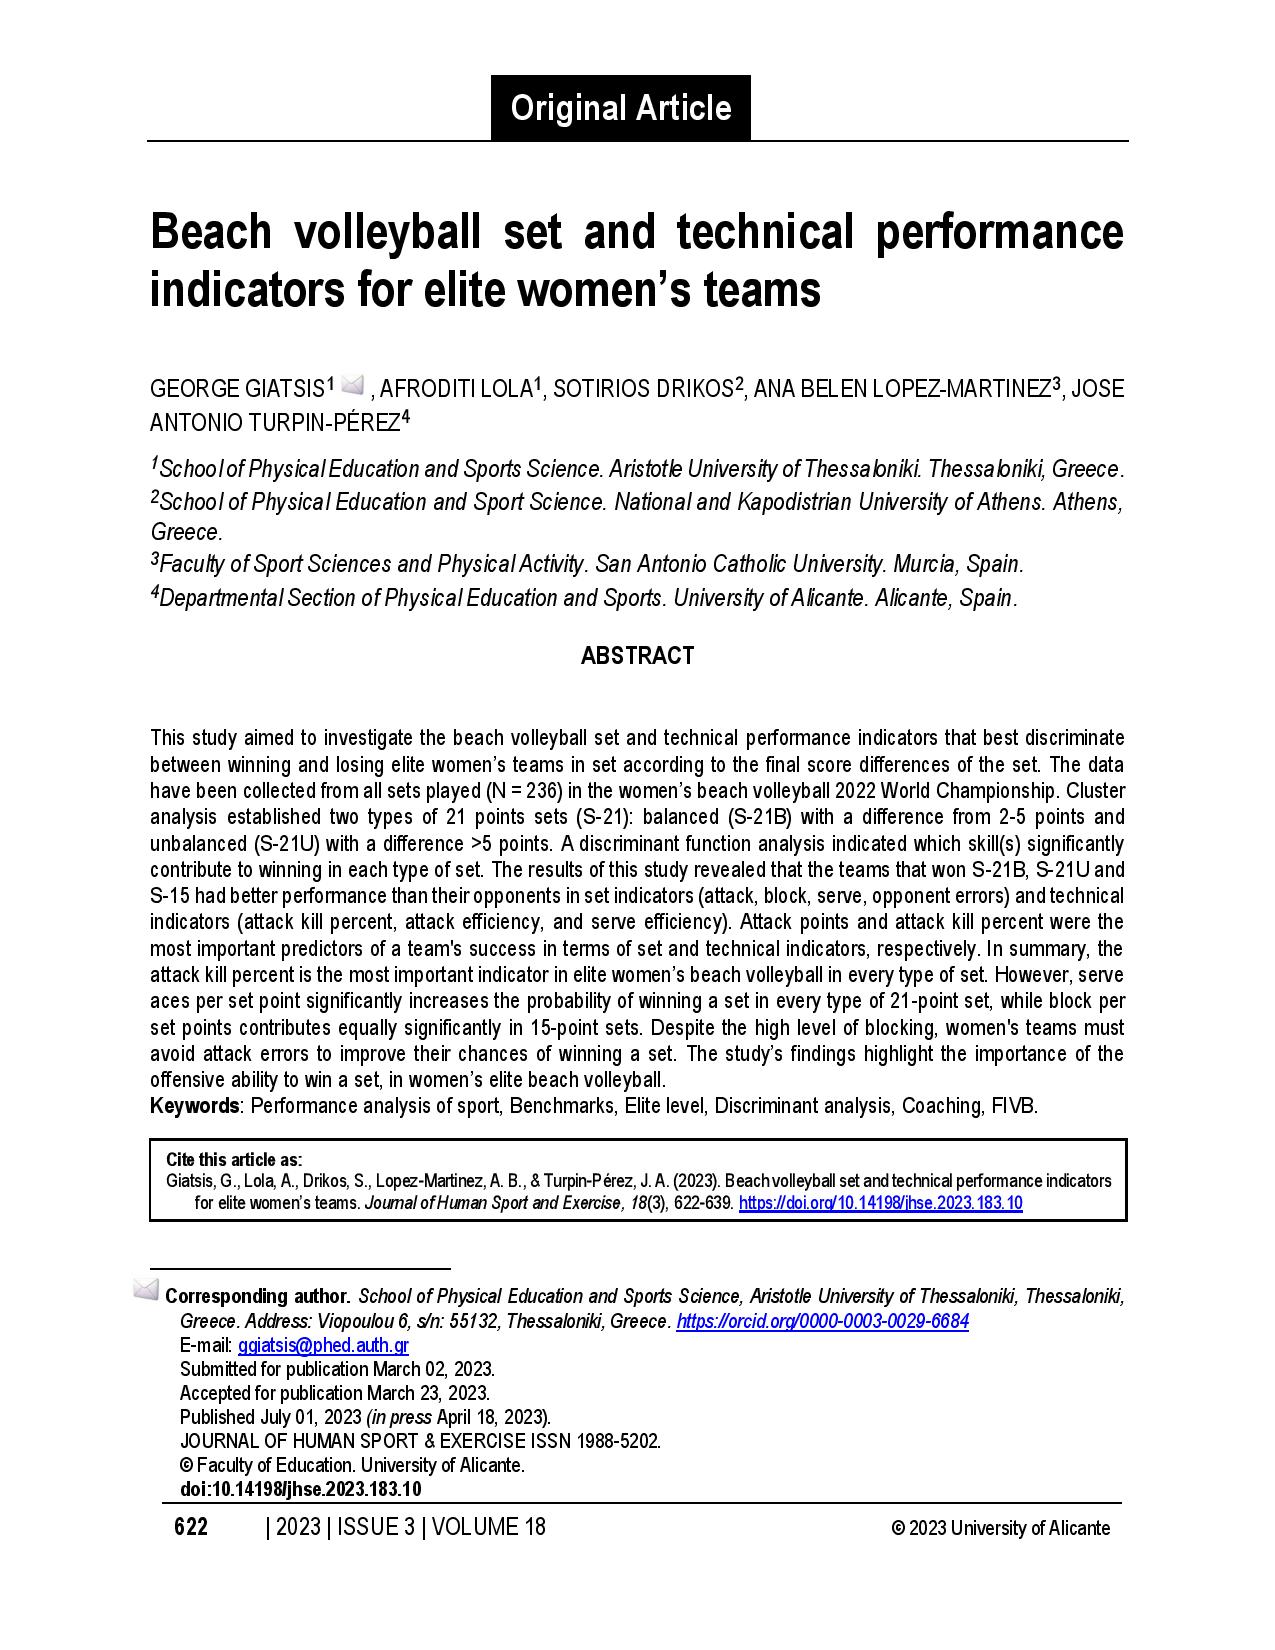 Beach volleyball set and technical performance indicators for elite women’s teams